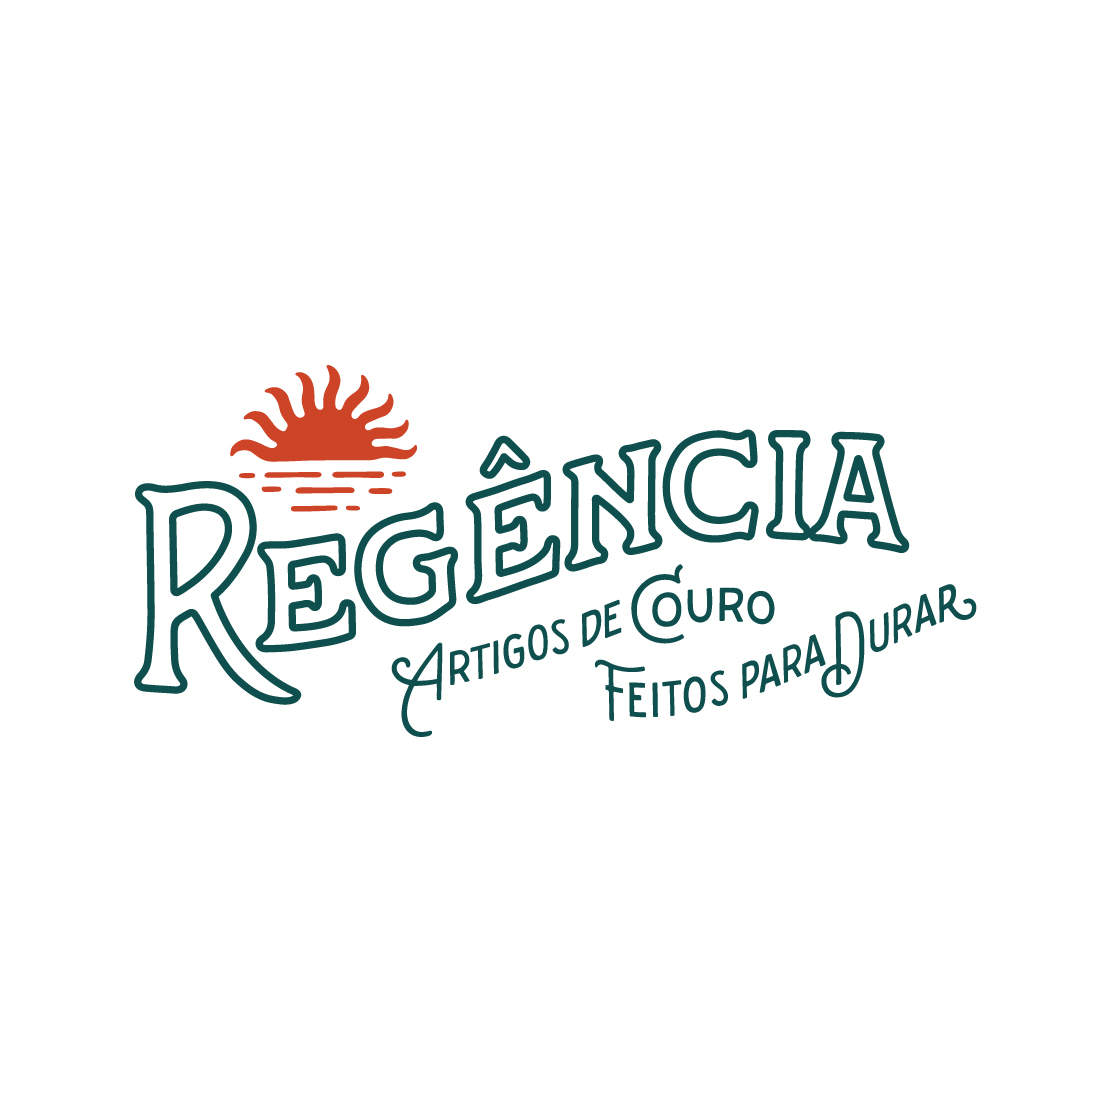 Regencia Leather Goods logo design by logo designer Guasca Studio Co. for your inspiration and for the worlds largest logo competition